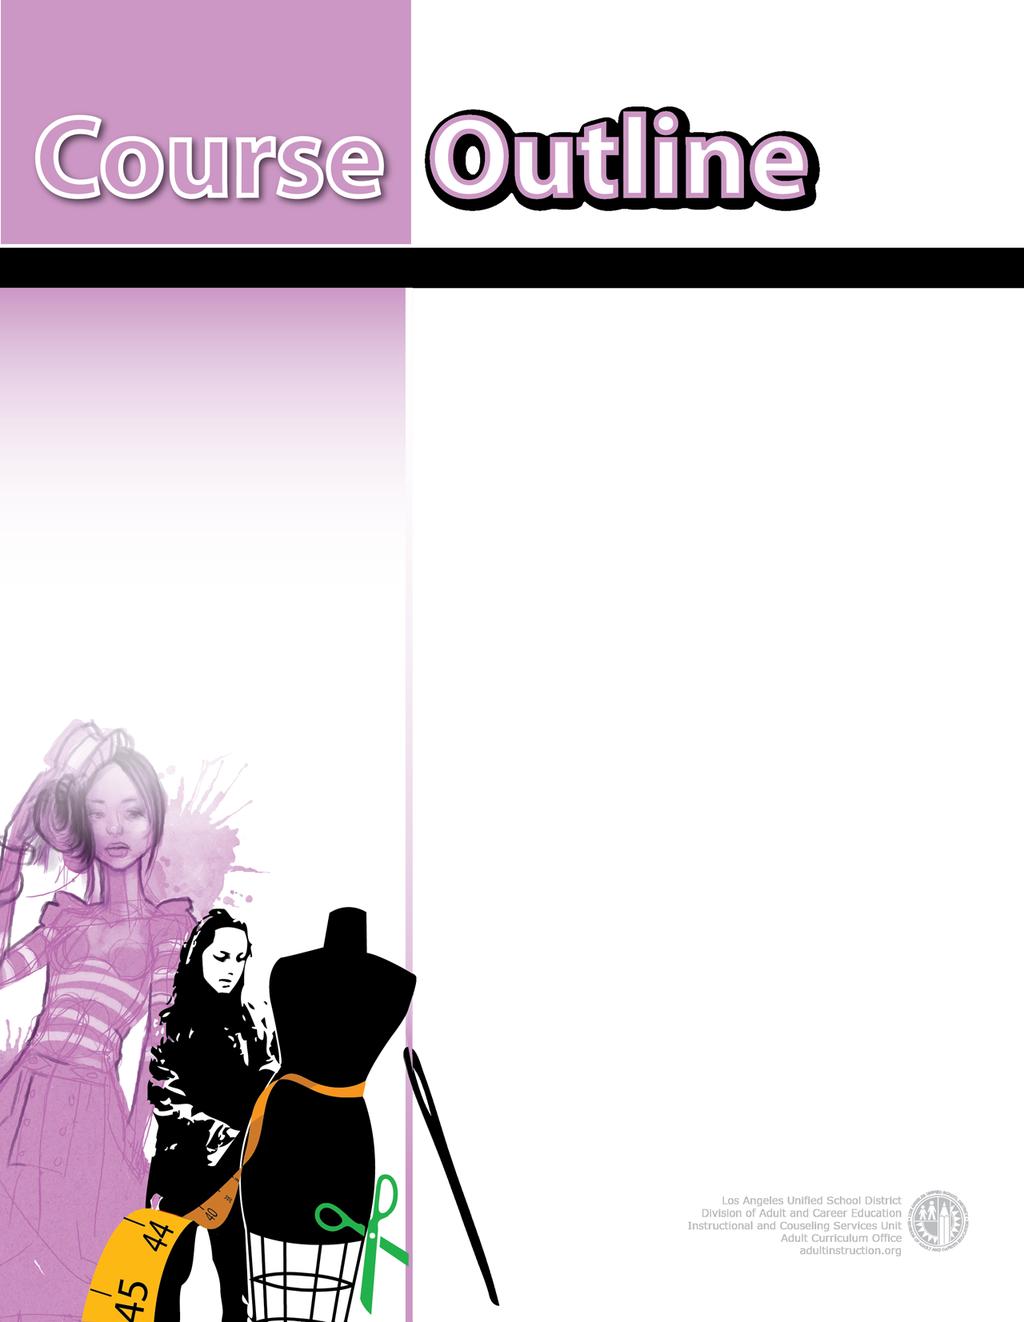 Fashion and Interior Design Course Description: The competencies in this course outline are aligned with the California High School Academic Content Standards and the California Career Technical